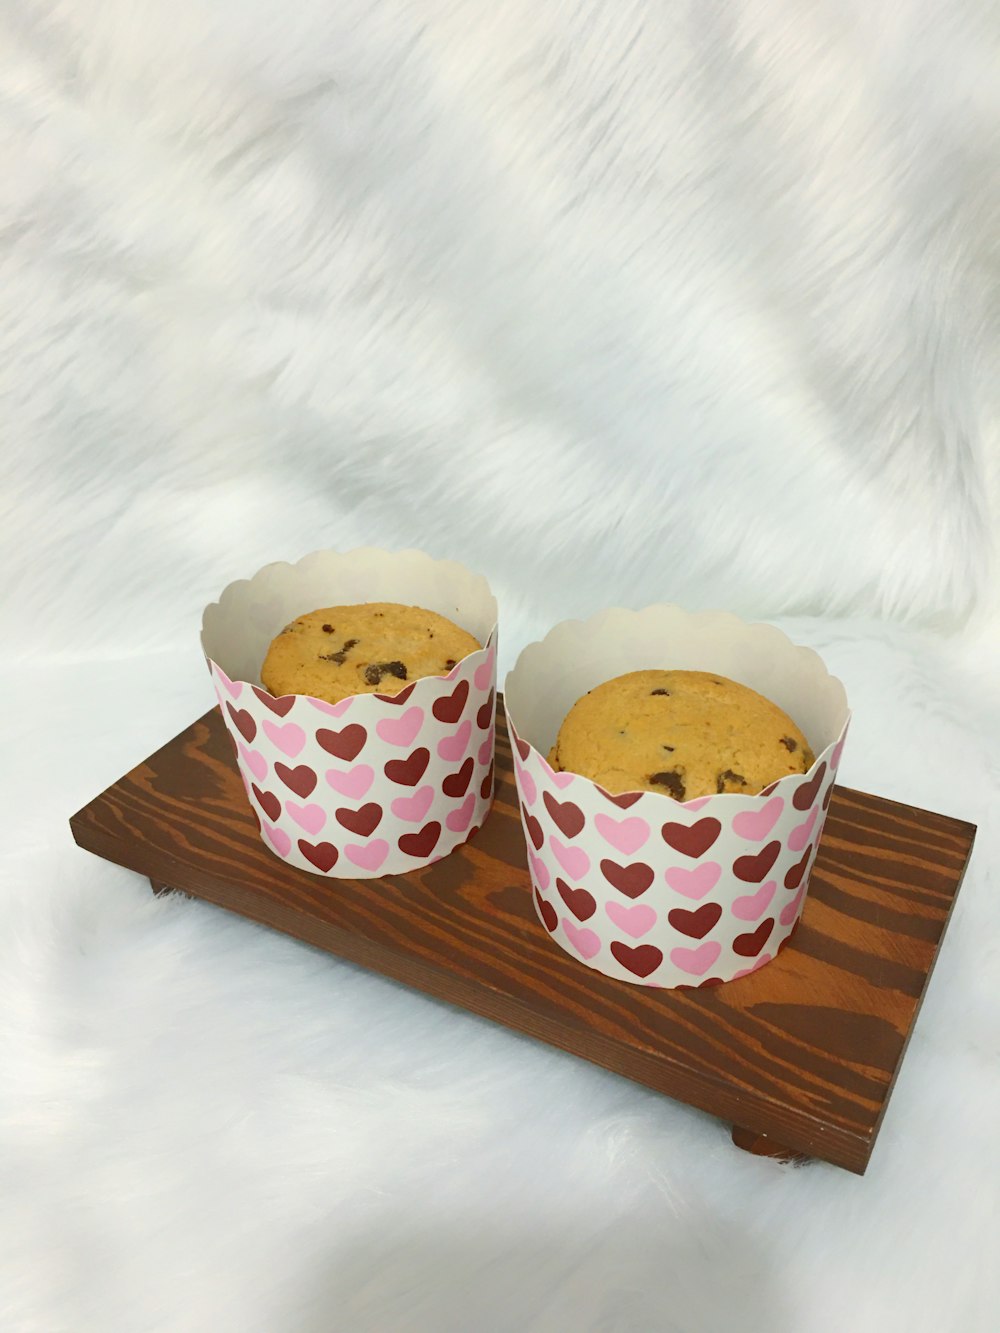 white and brown polka dot cupcakes on brown wooden tray